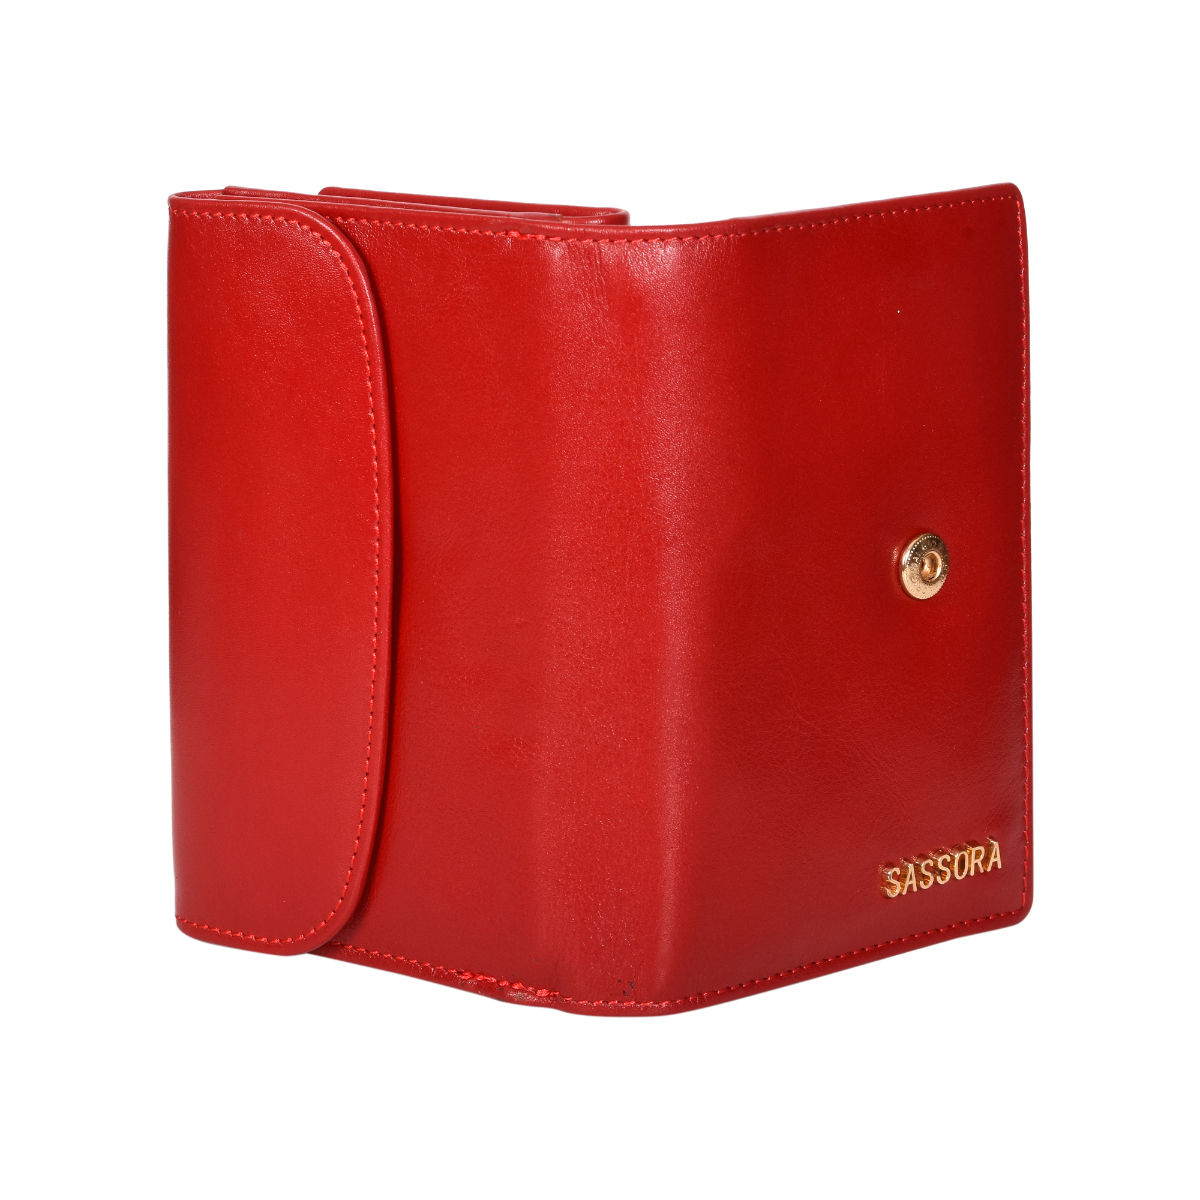 Coccinelle Metallic Soft wallet in red leather